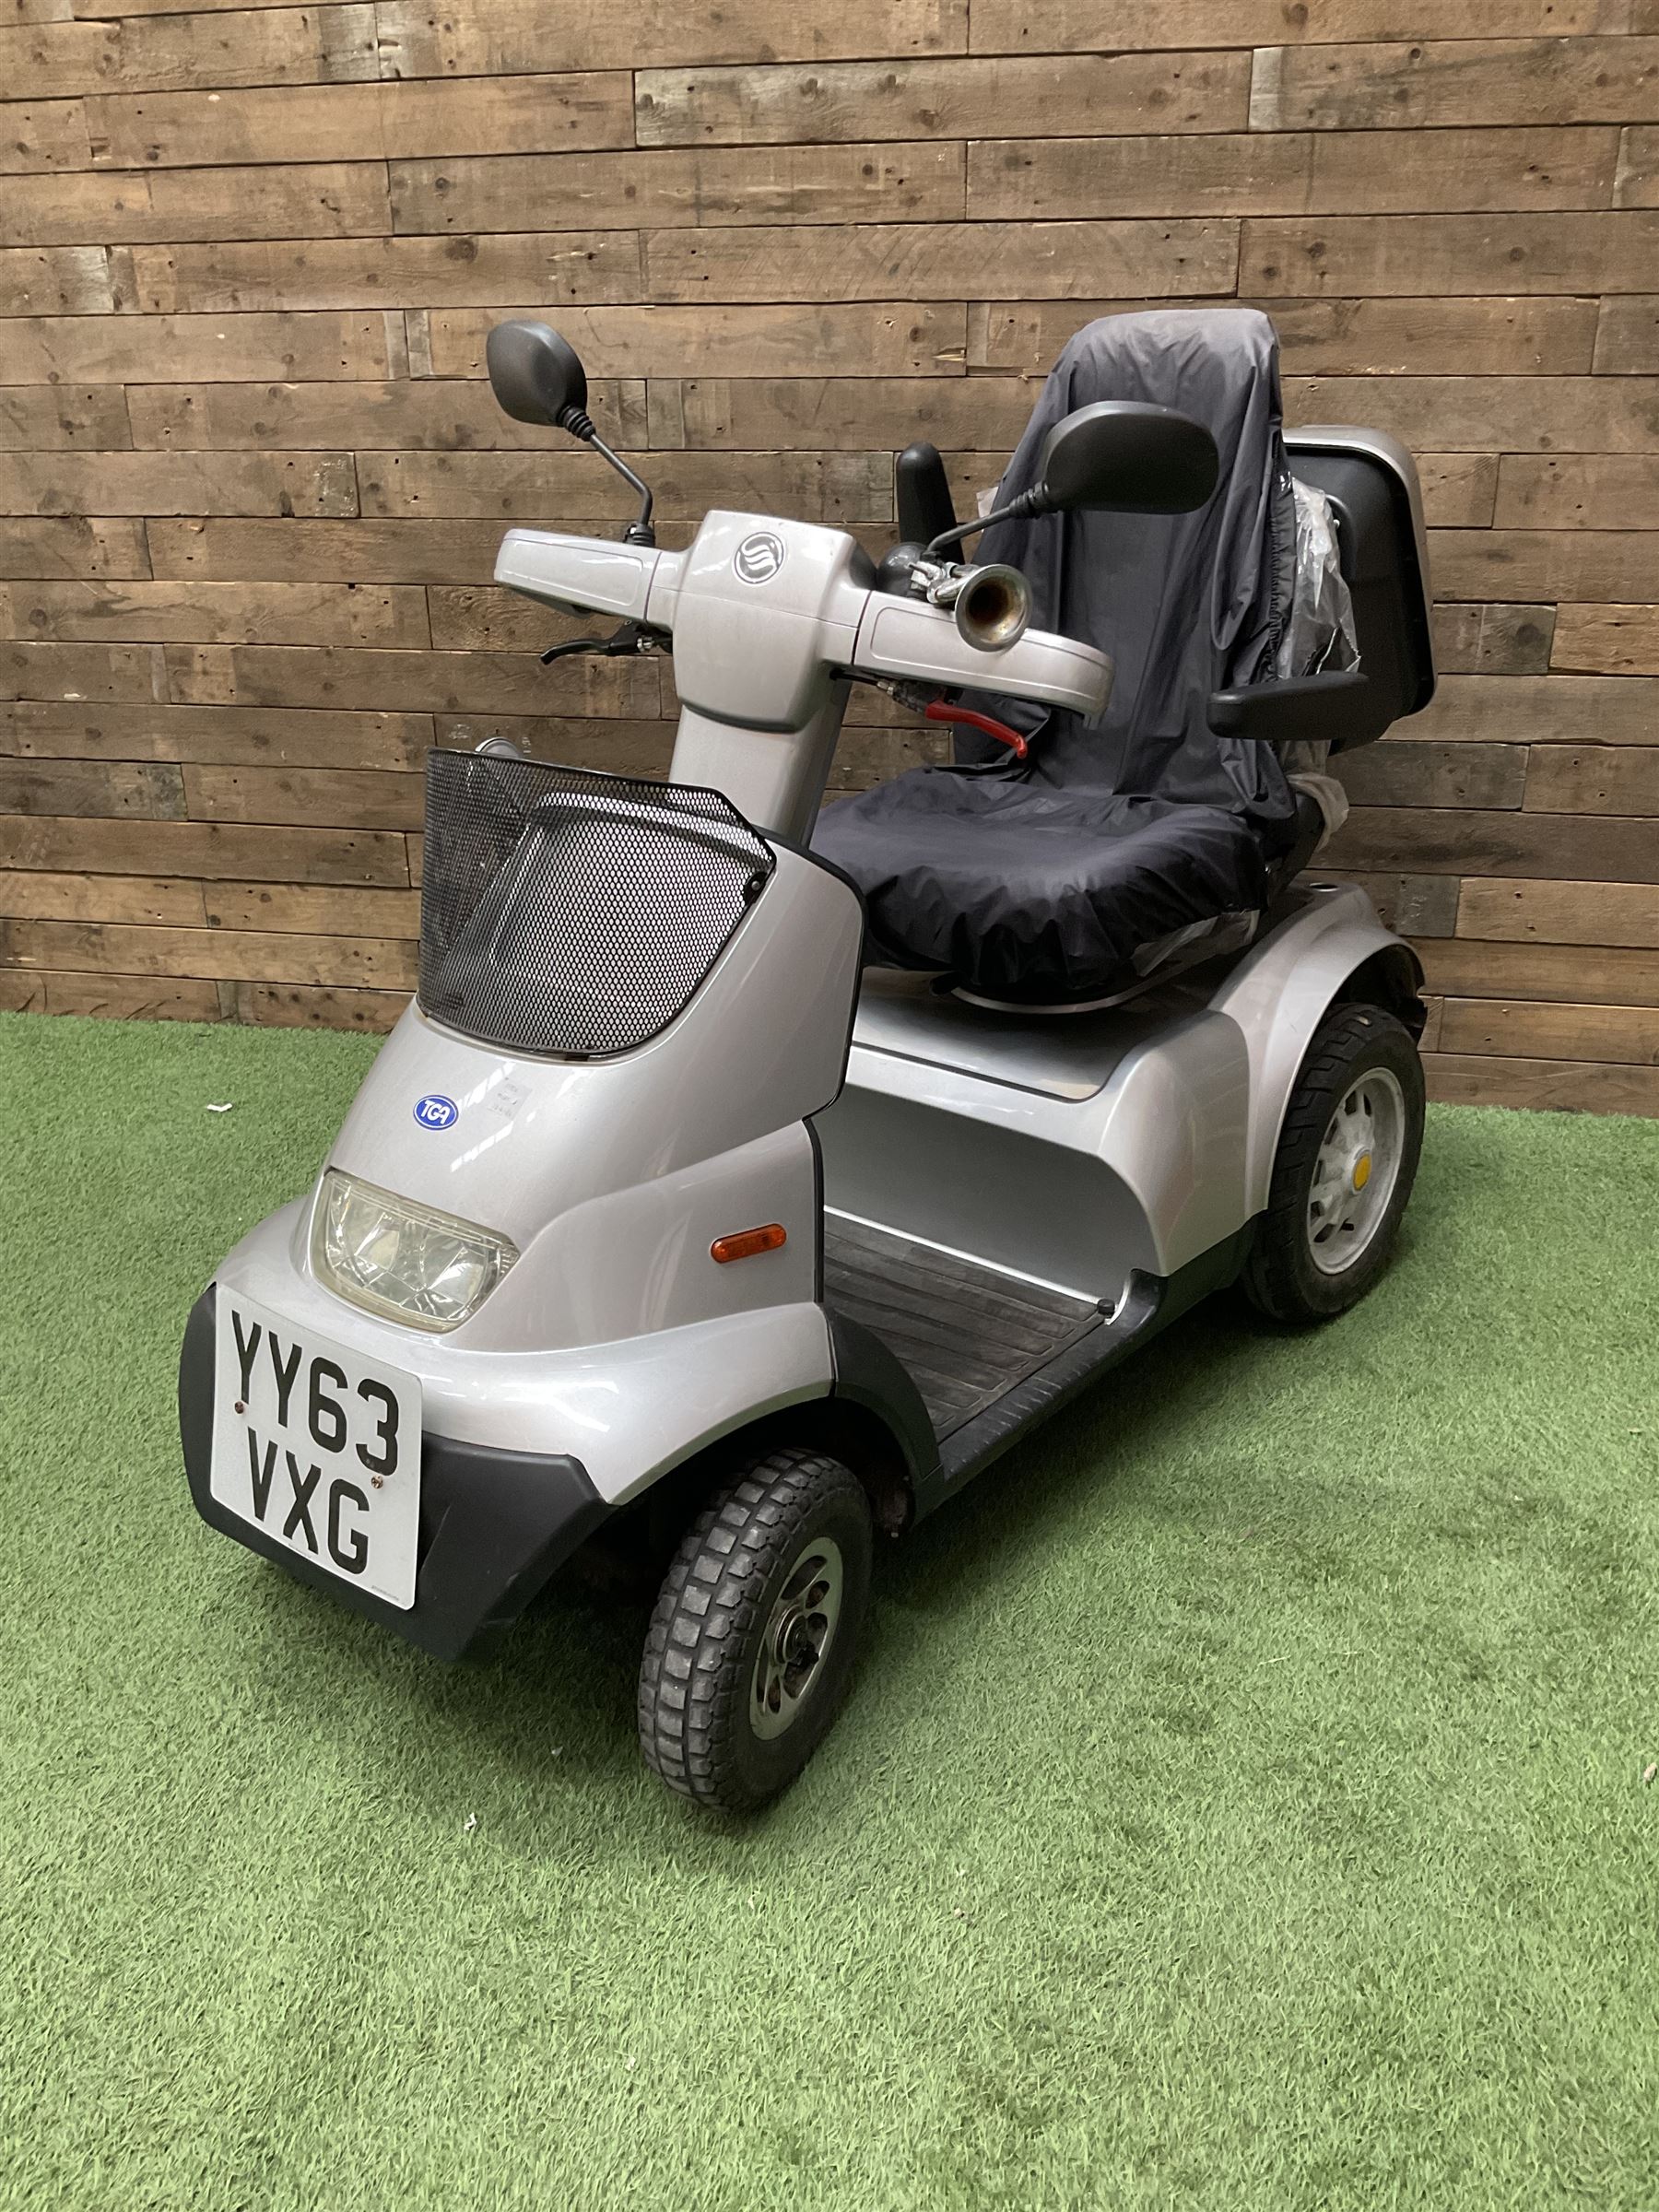 TGA Breeze-S 8mph mobility scooter with charger and keys